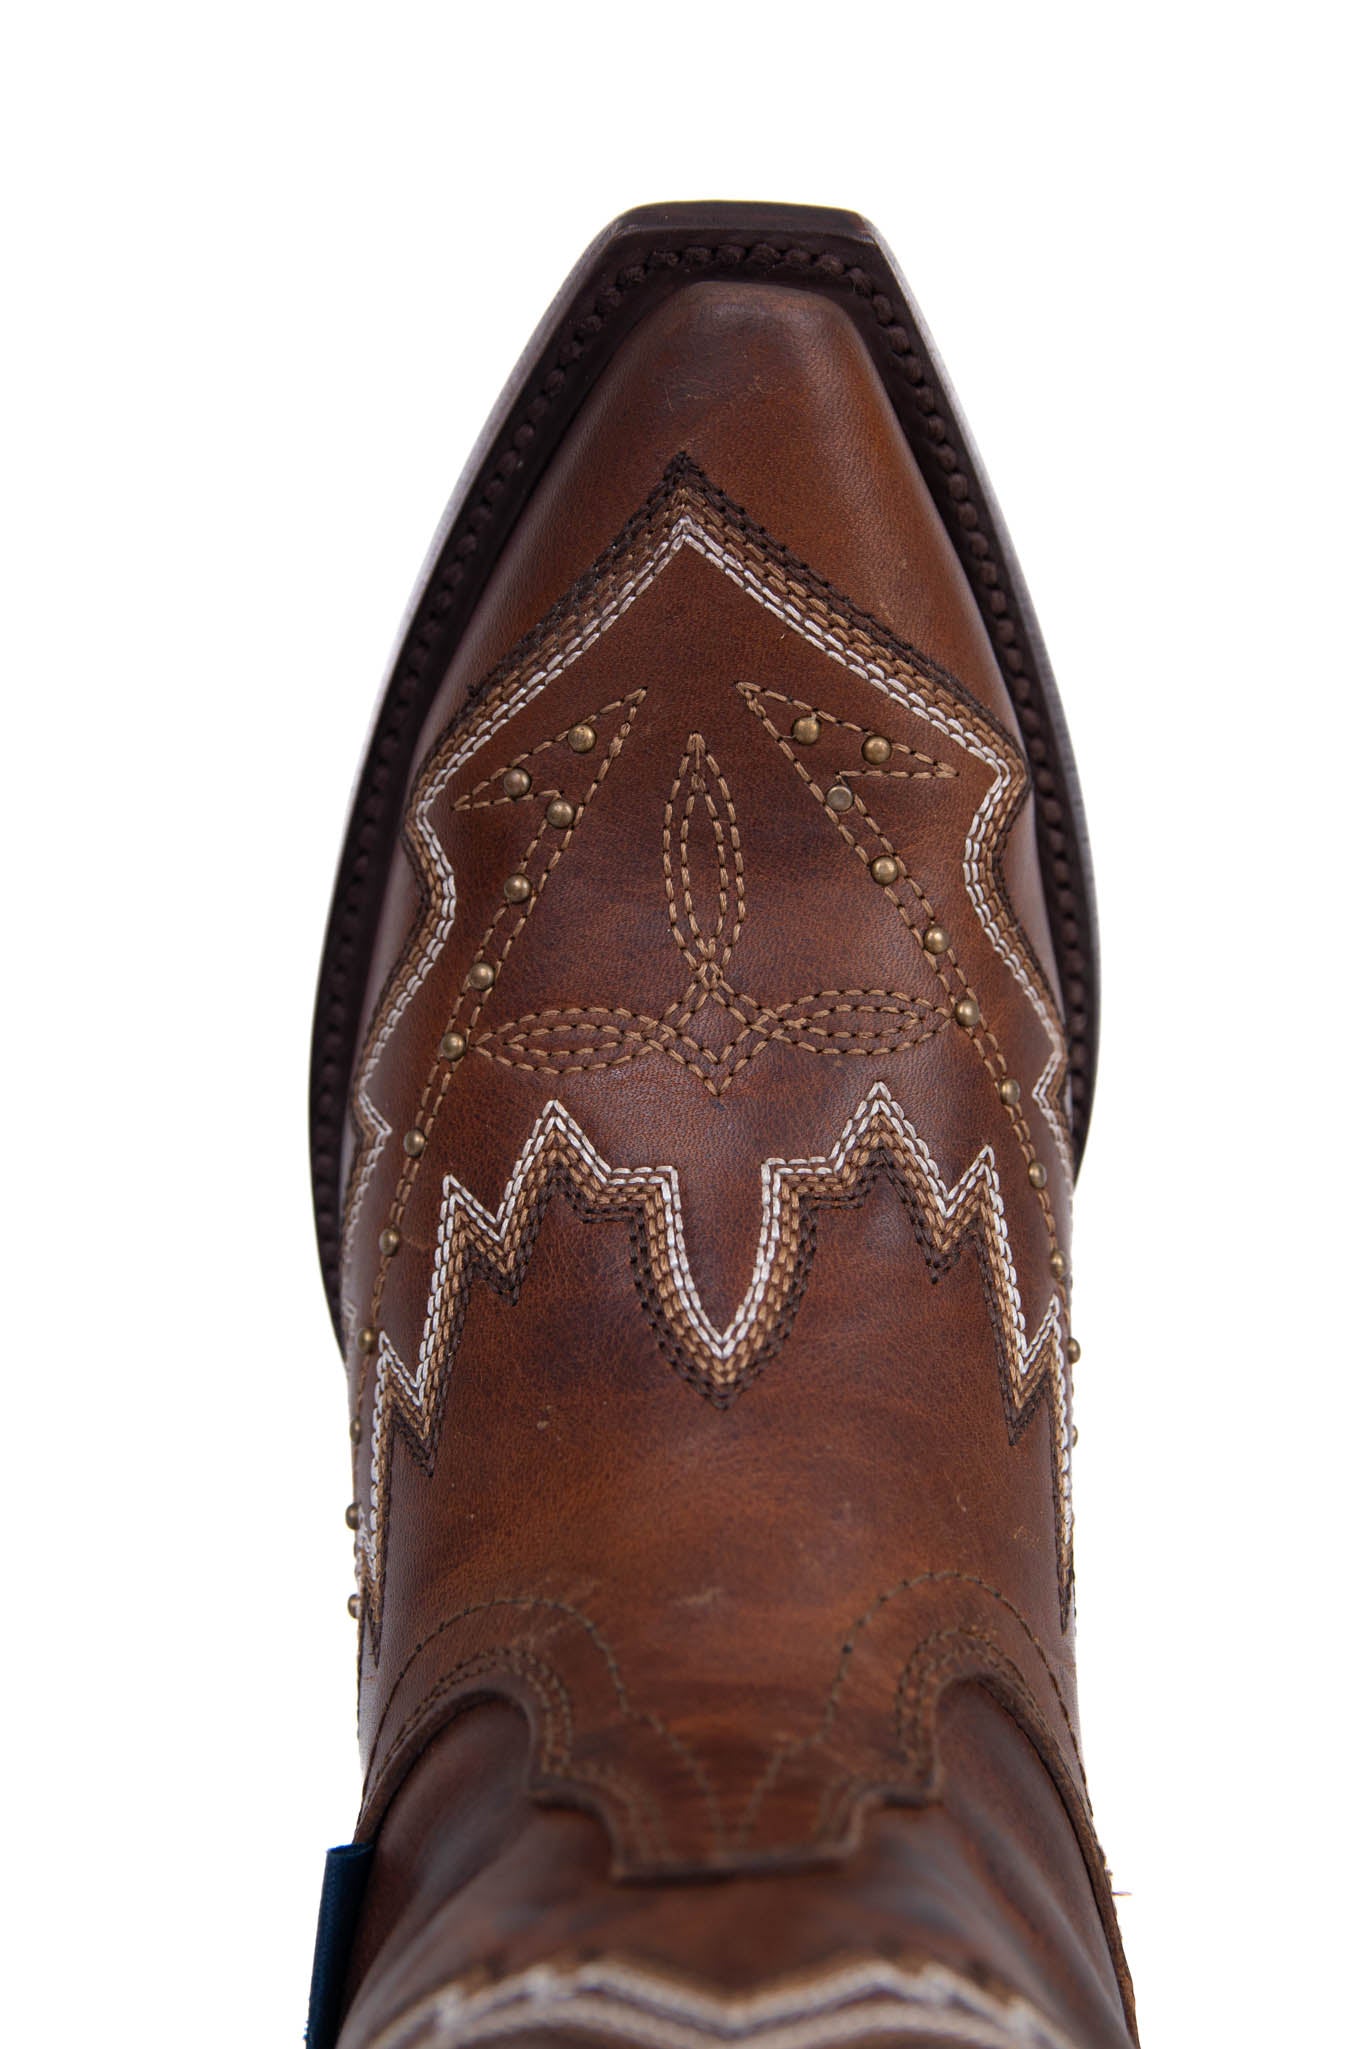 Est. Nallely Tall Cowgirl Boot